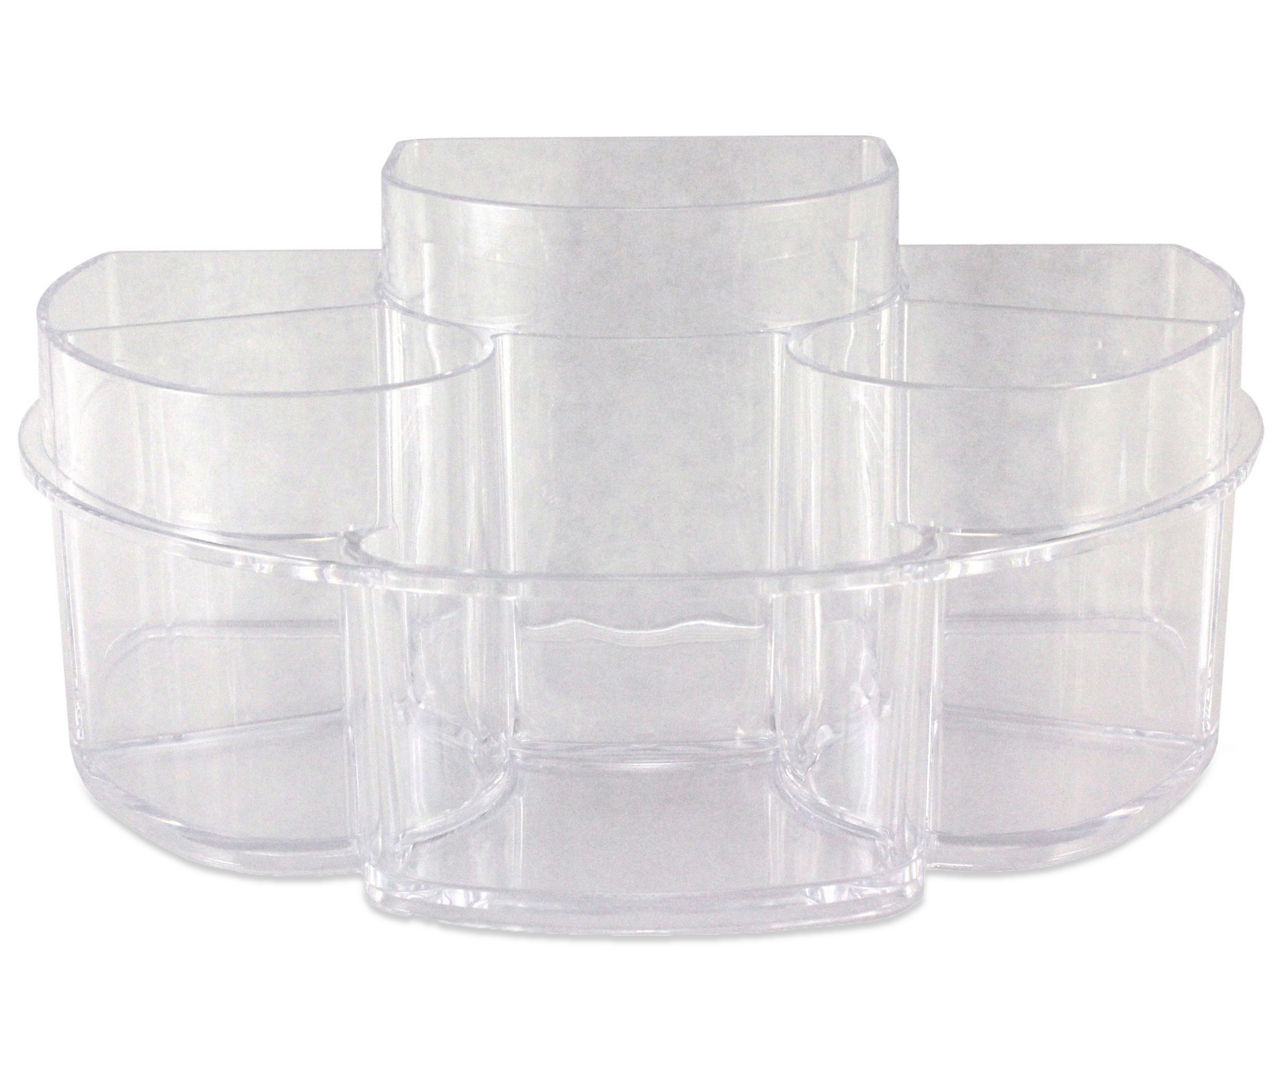 Excellerations Translucent Buckets - Set of 6